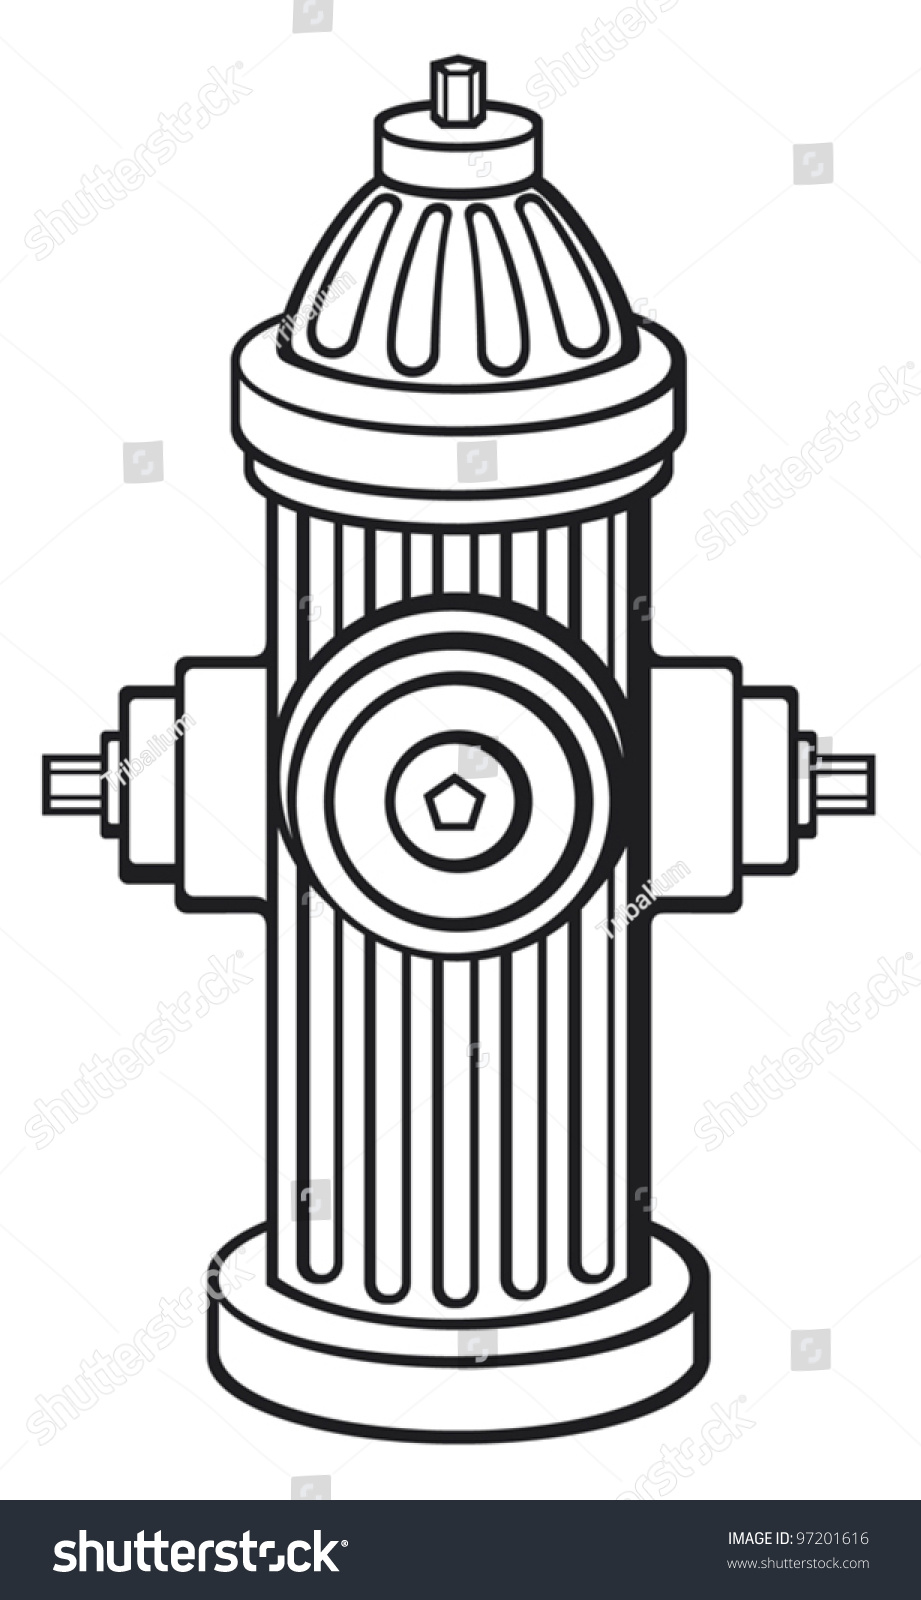 free fire hydrant clipart - photo #32